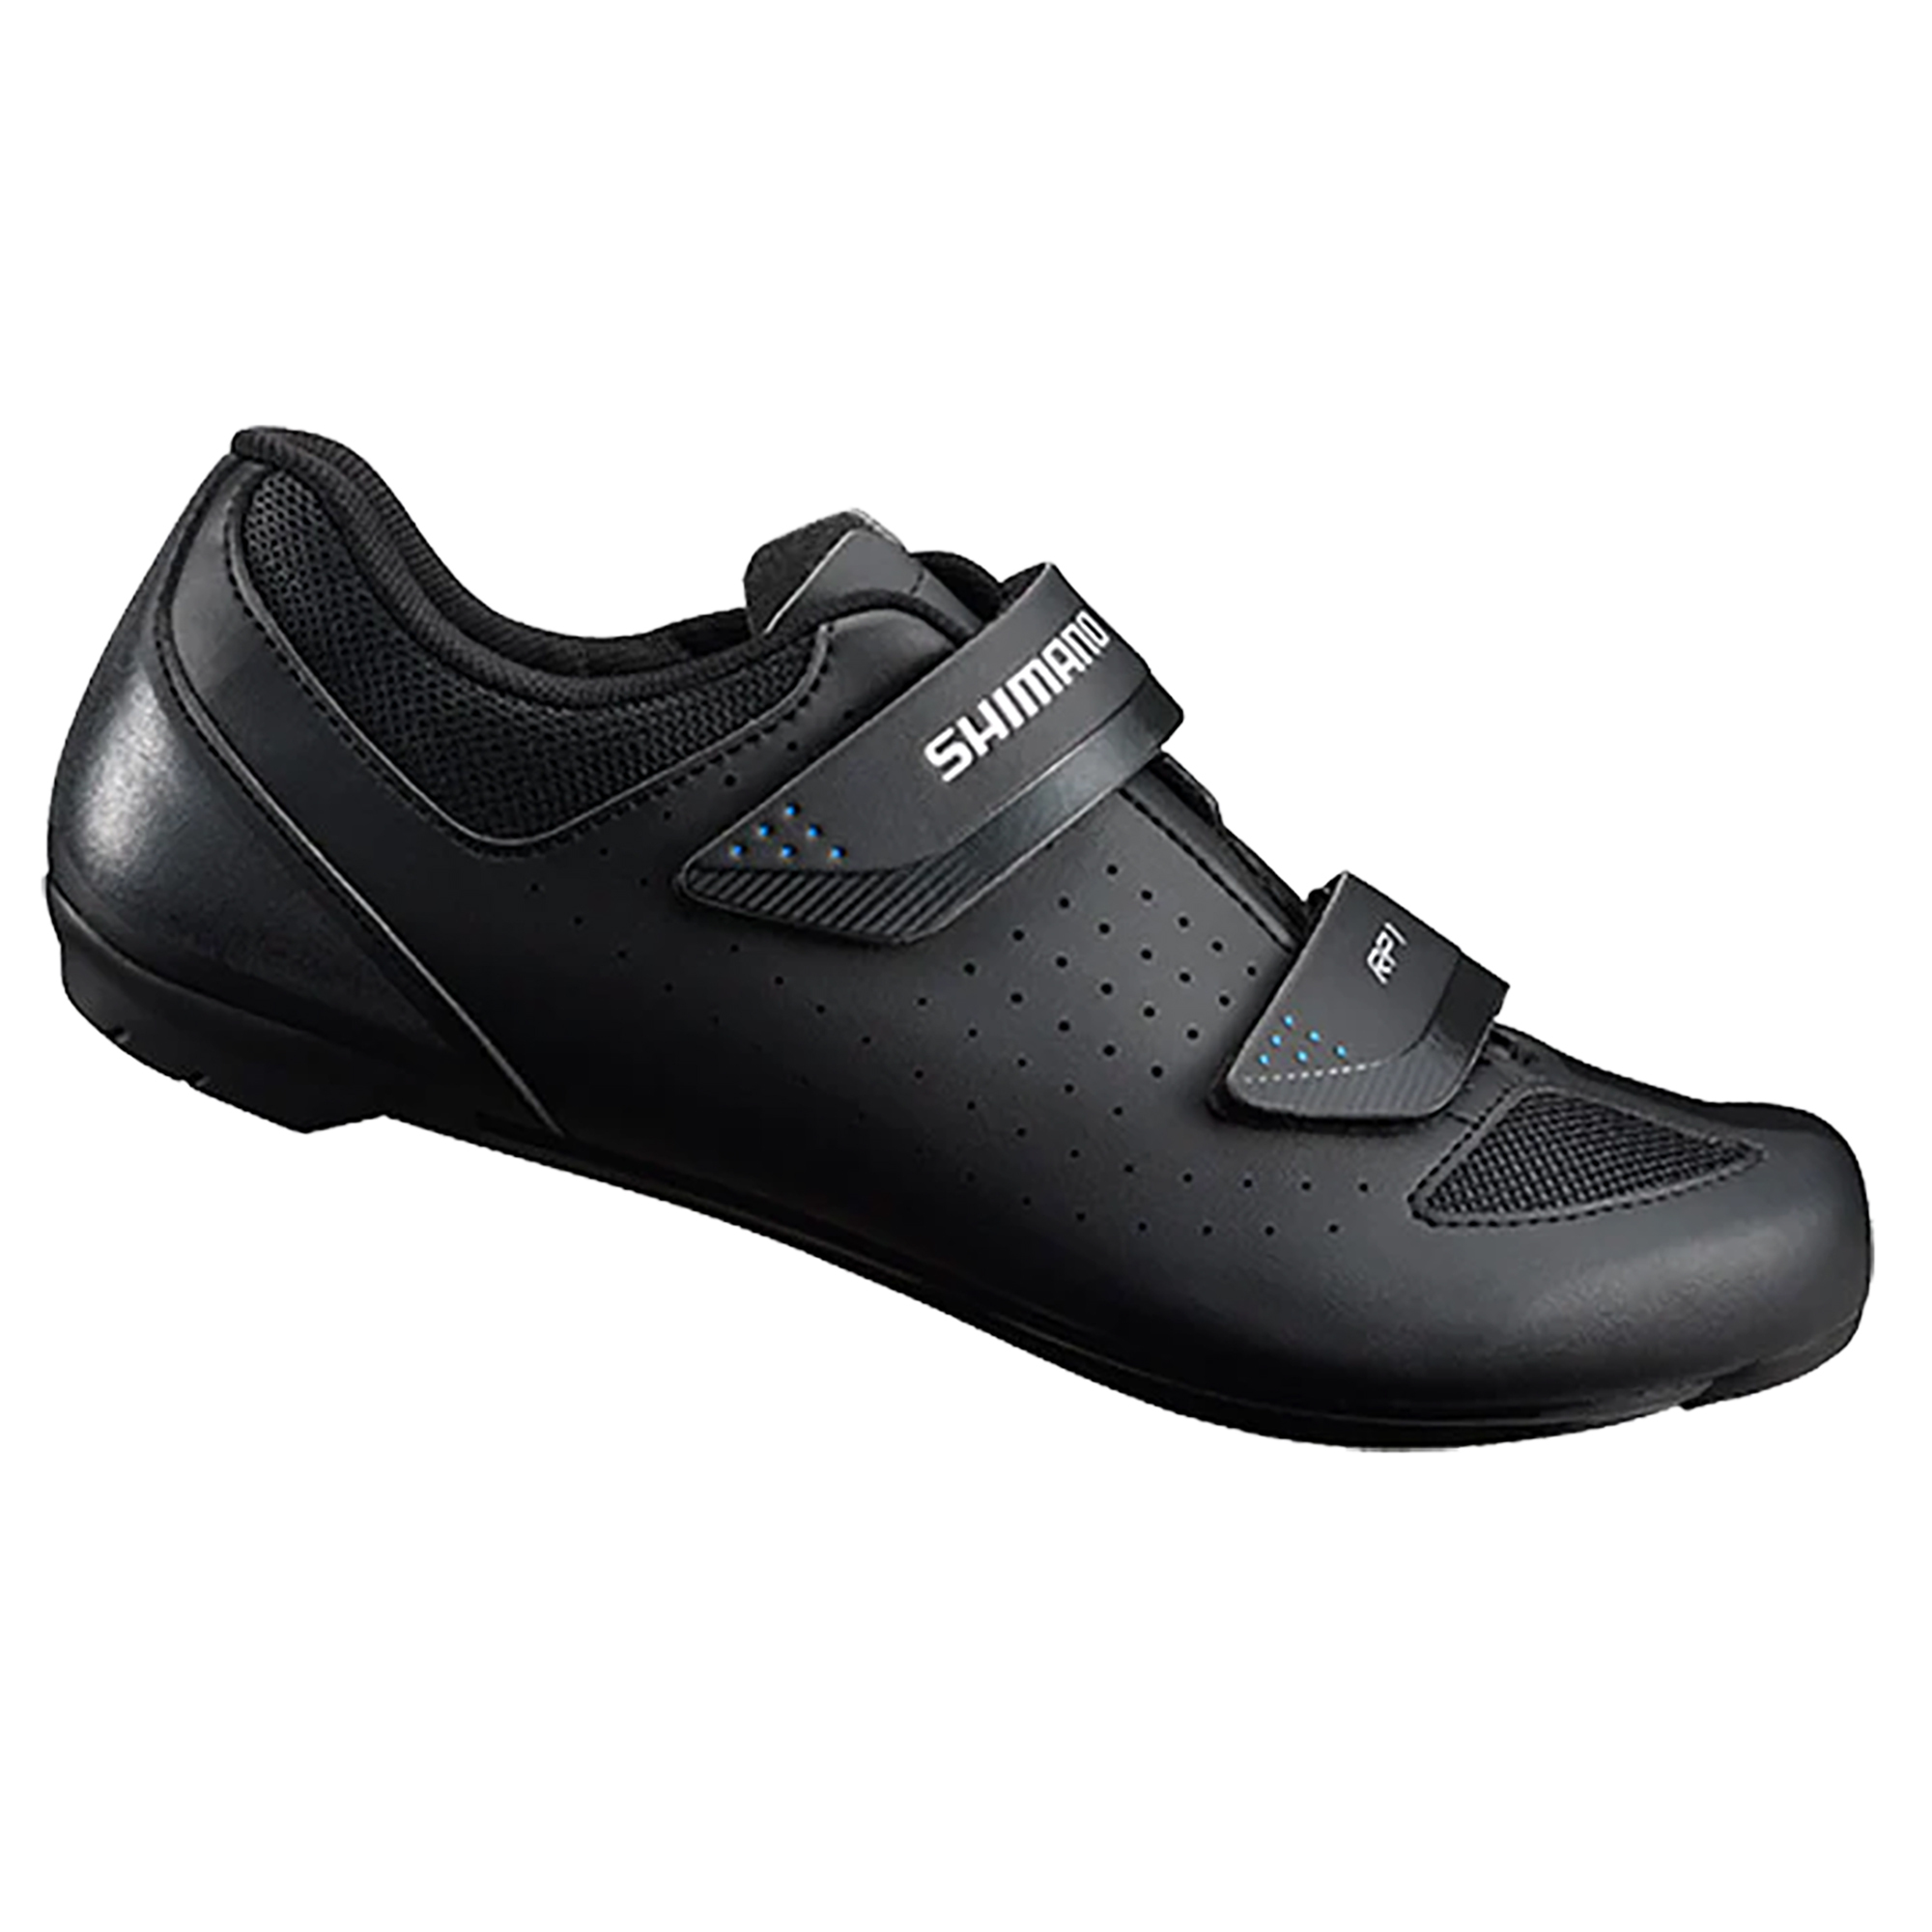 Shimano RP1 Road Bicycle Shoes For SPD SL Black Size 44